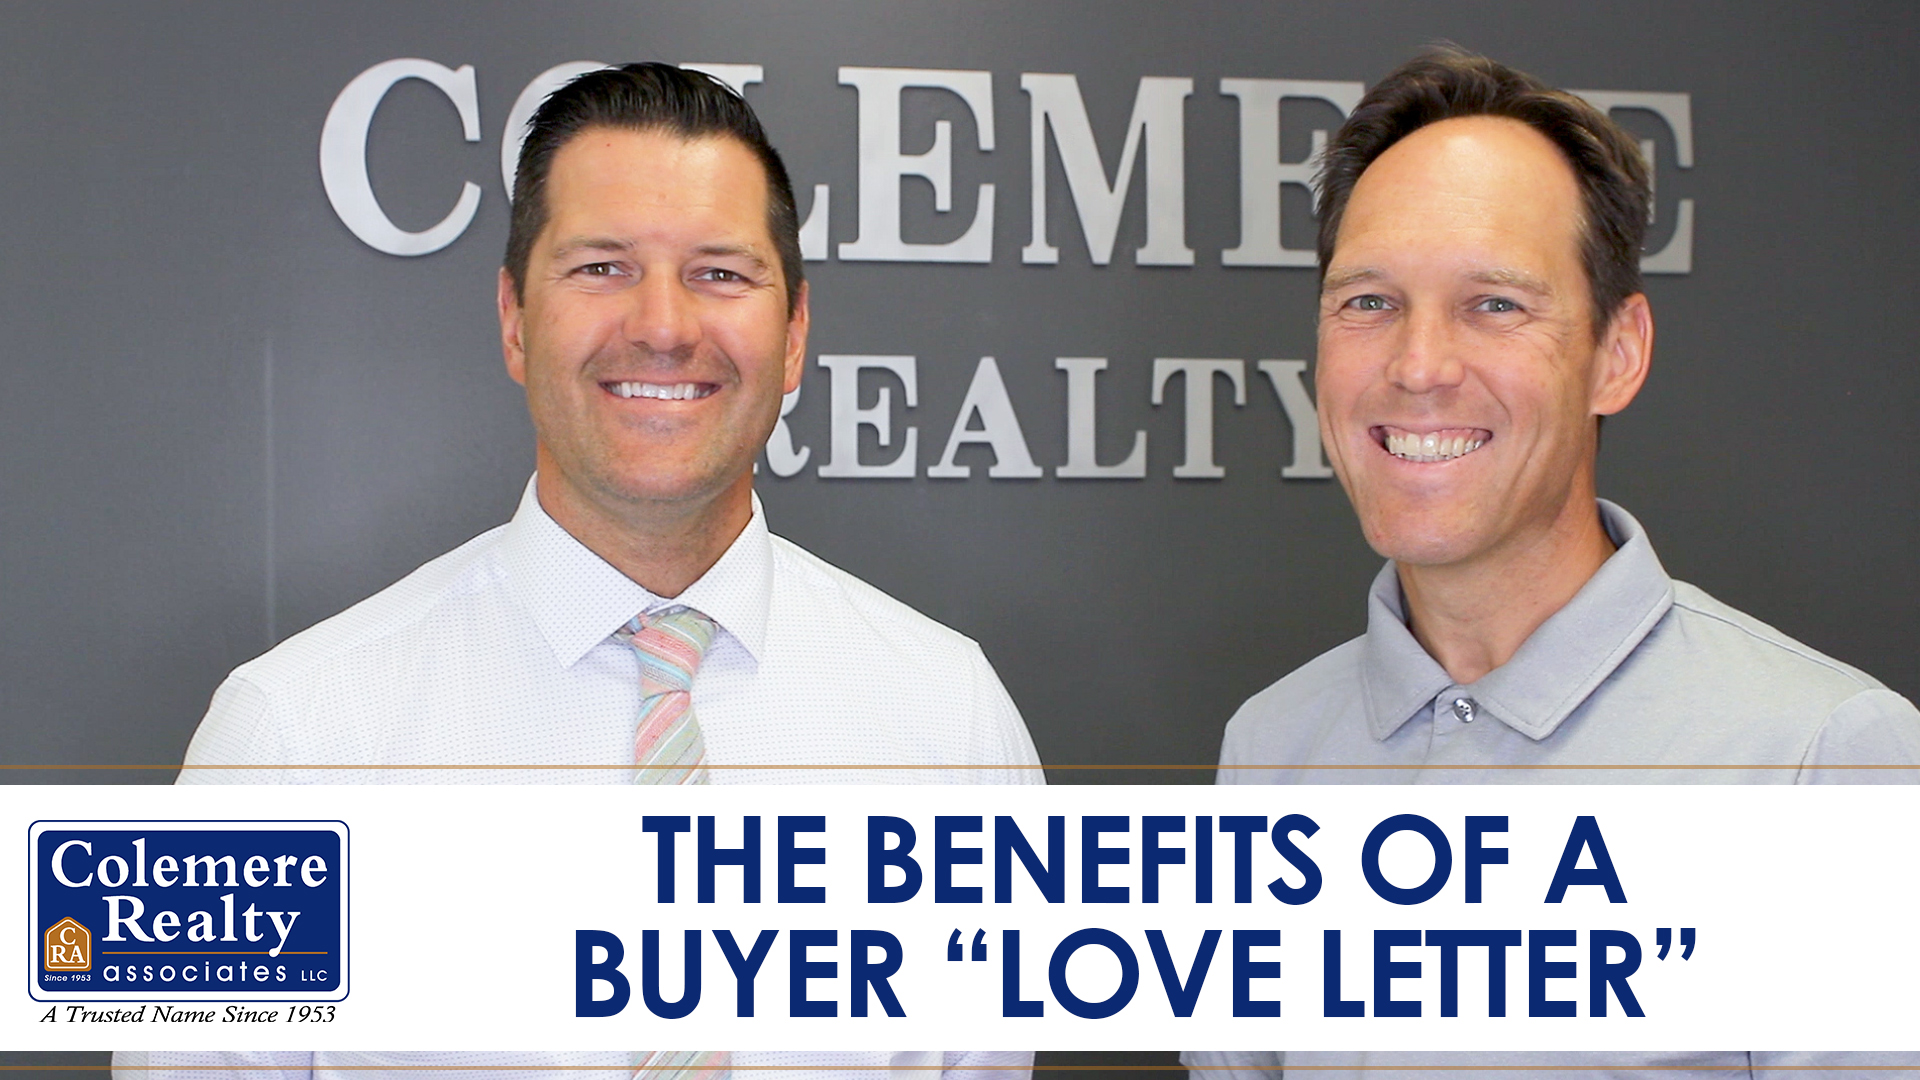 How Can a “Love Letter” Help You Win the Home You Want?